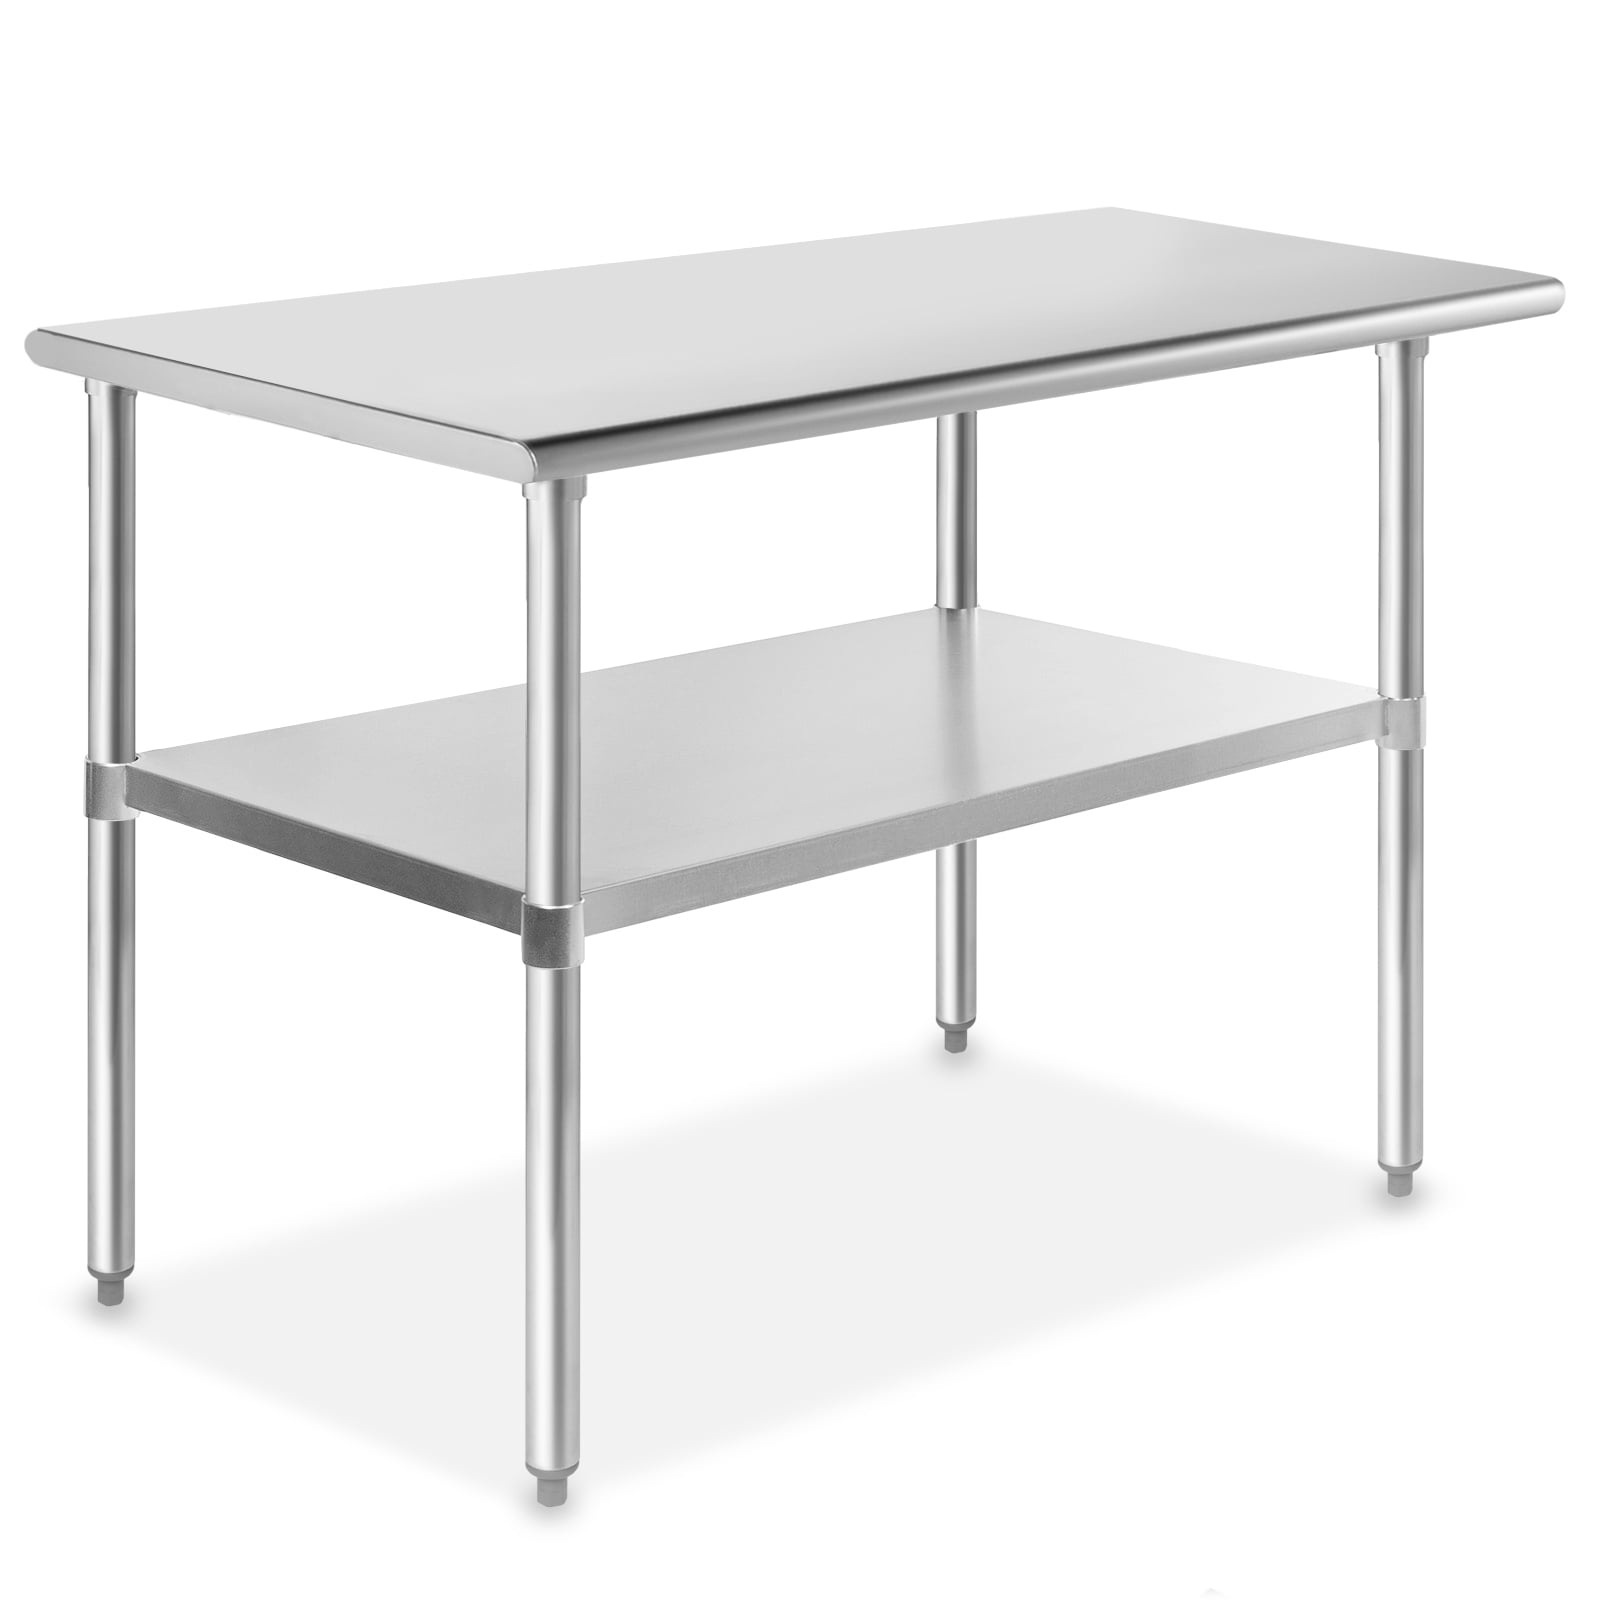 Stainless Steel Top Work Table Kitchen Restaurant Prep NSF Casters 24" x 49" 